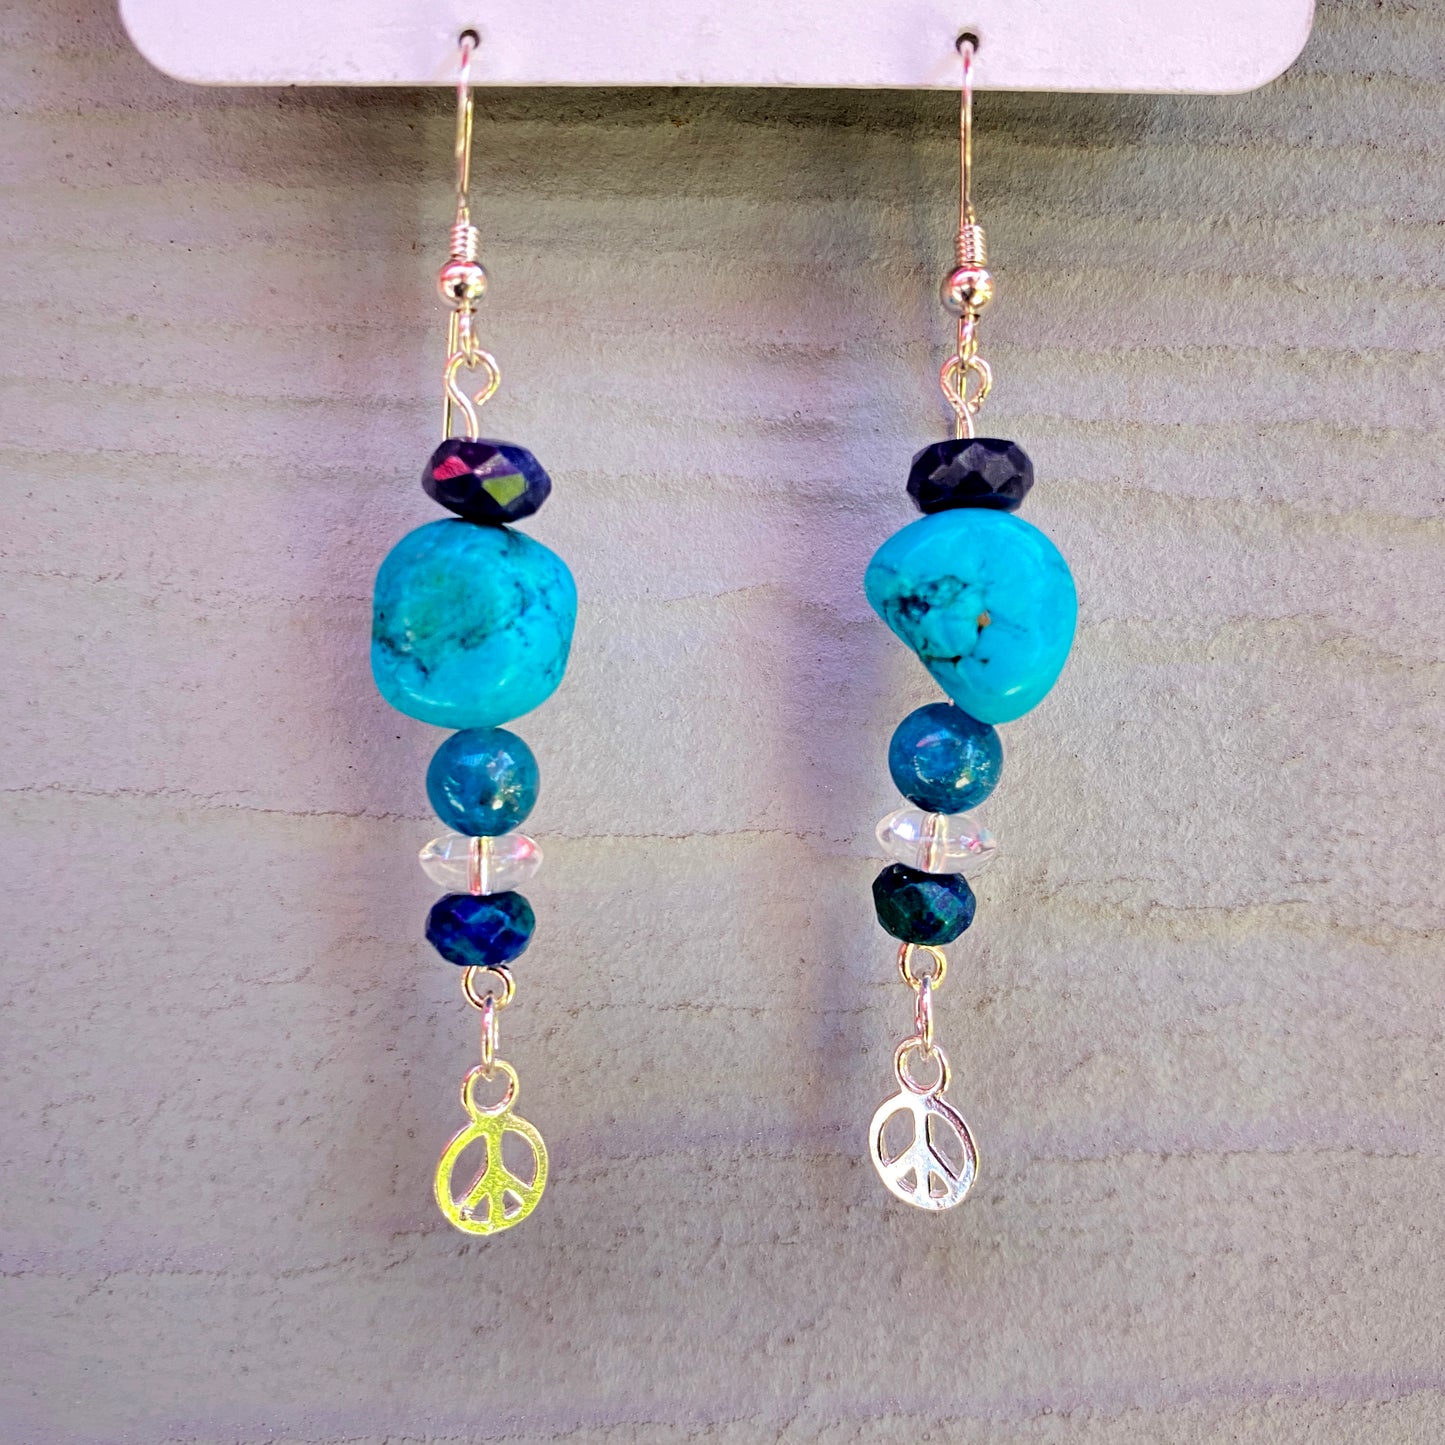 Turquoise Gemstone drop Earrings with Sapphire, Gemstones and sterling silver peace sign or feather